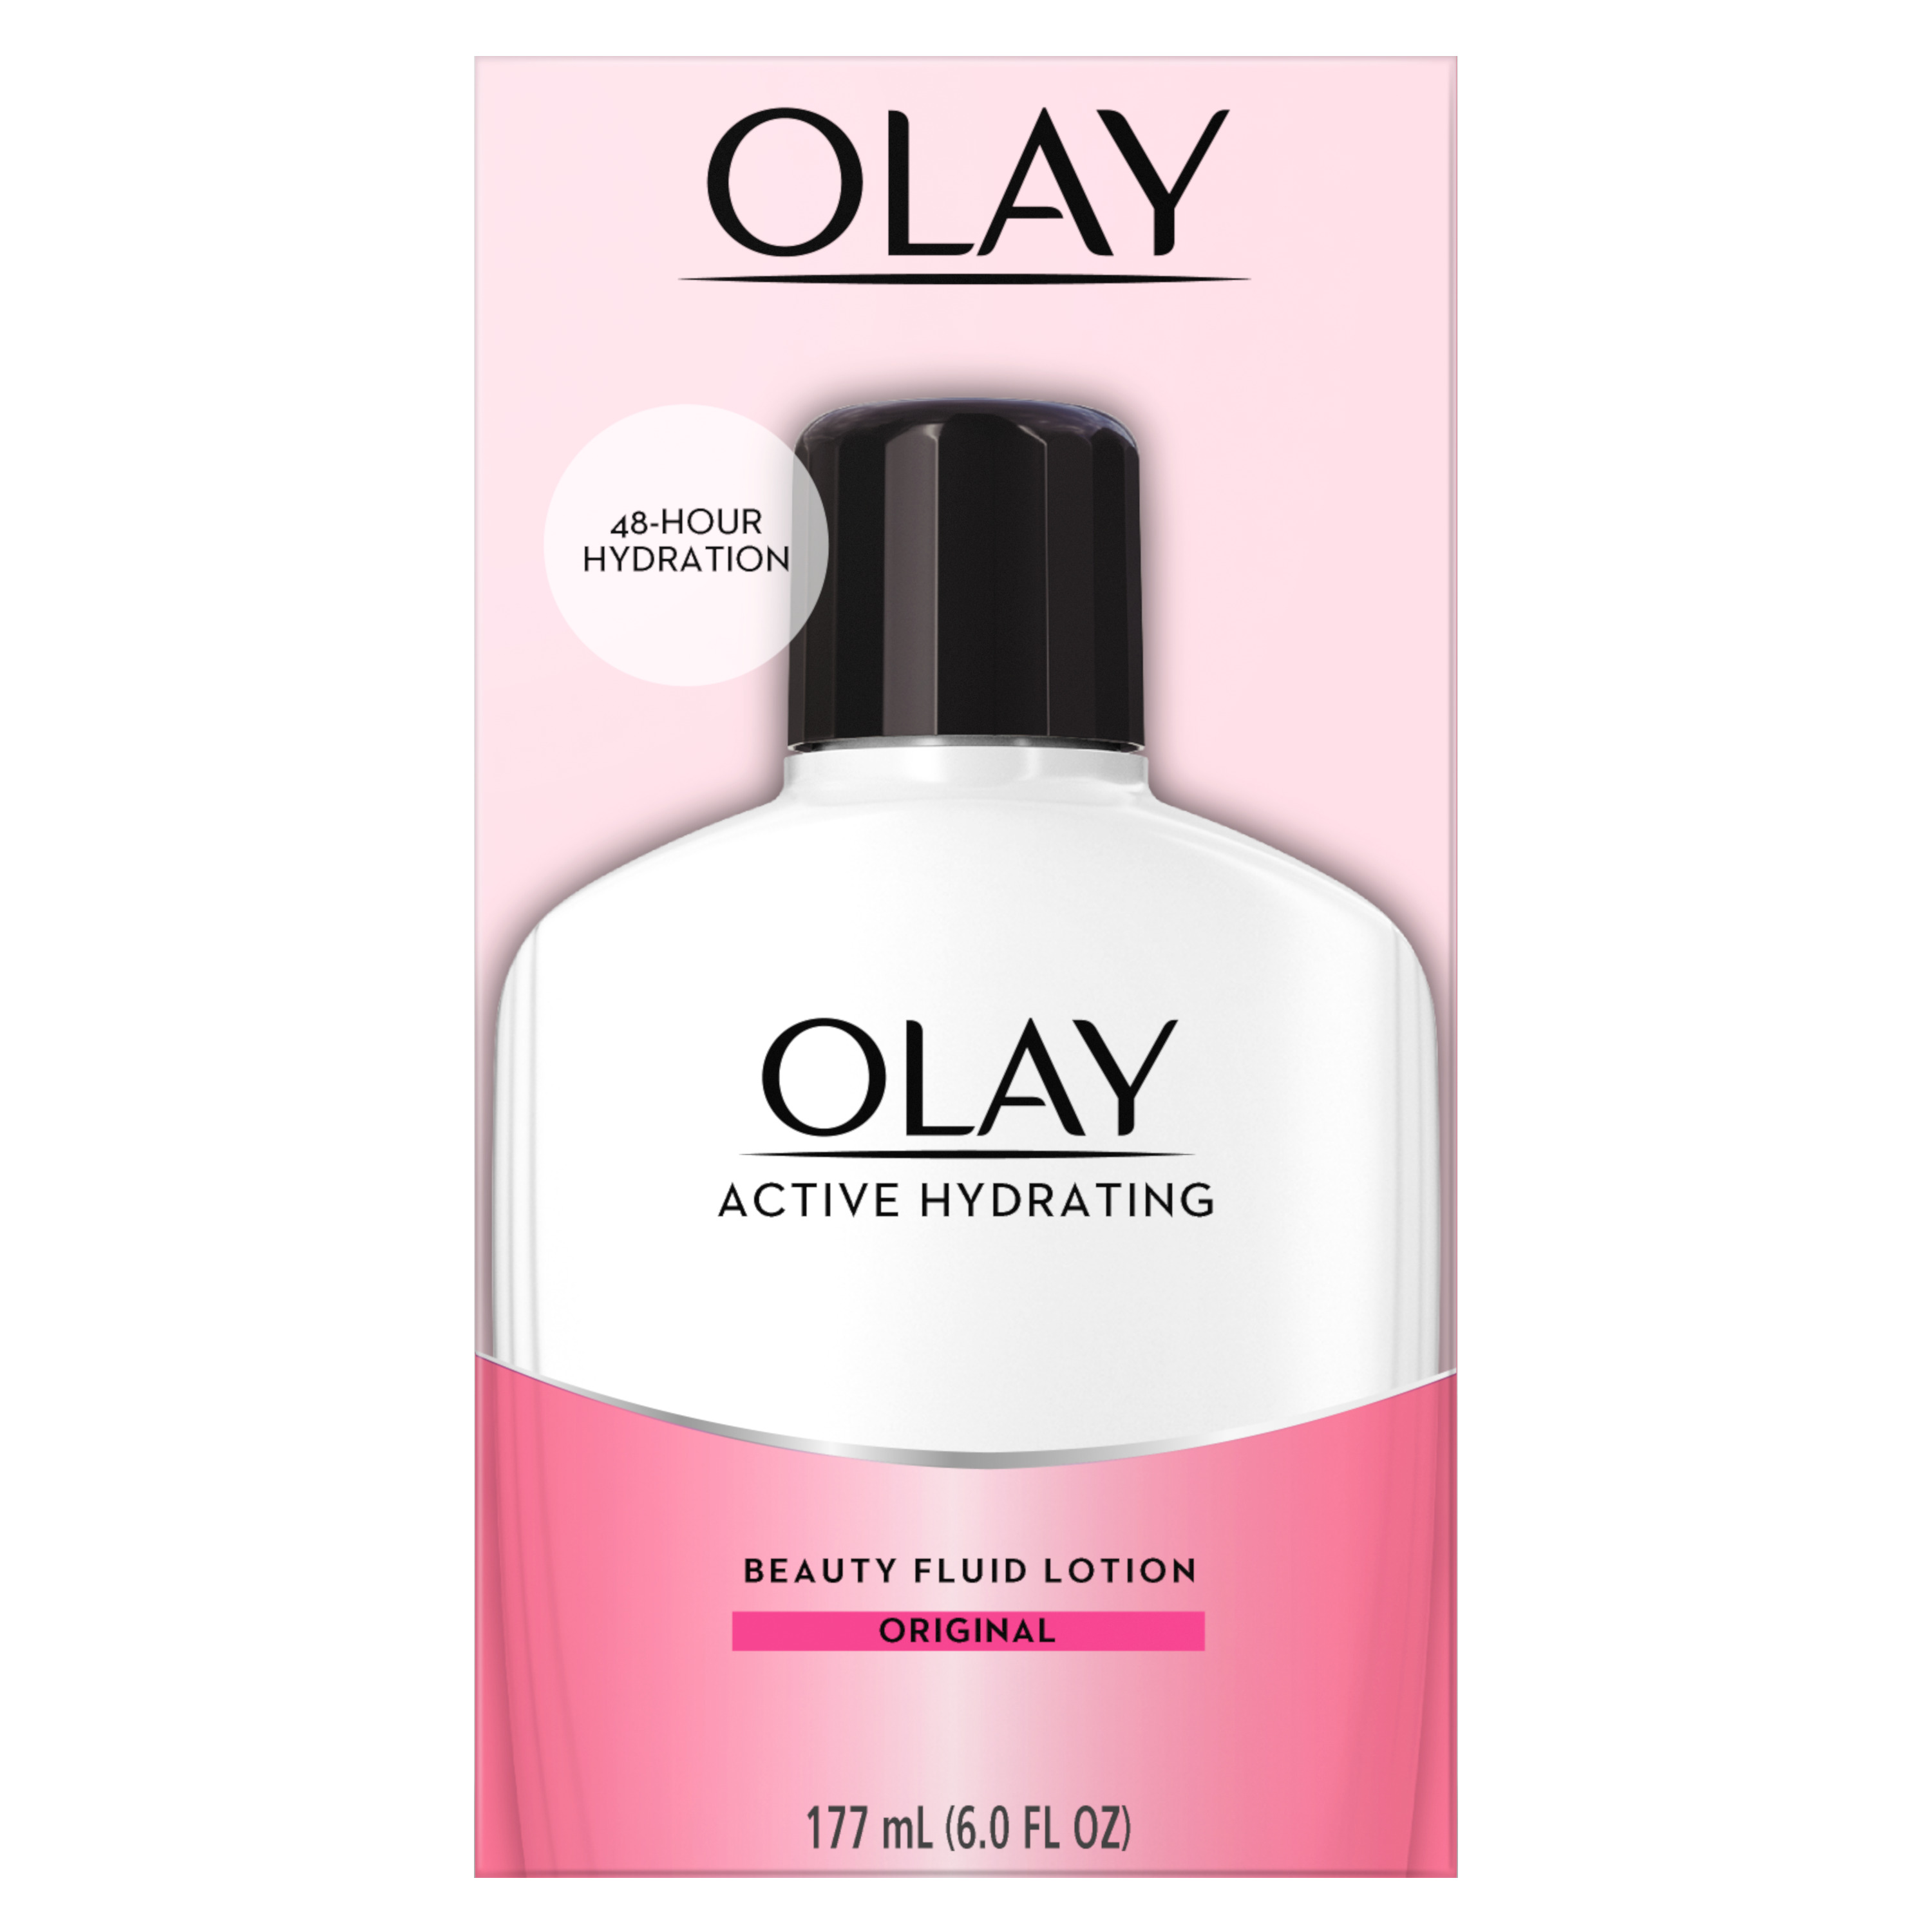 Olay Skincare Active Hydrating Beauty Facial Moisturizing Lotion, All Skin Types, 6 fl oz - image 3 of 8